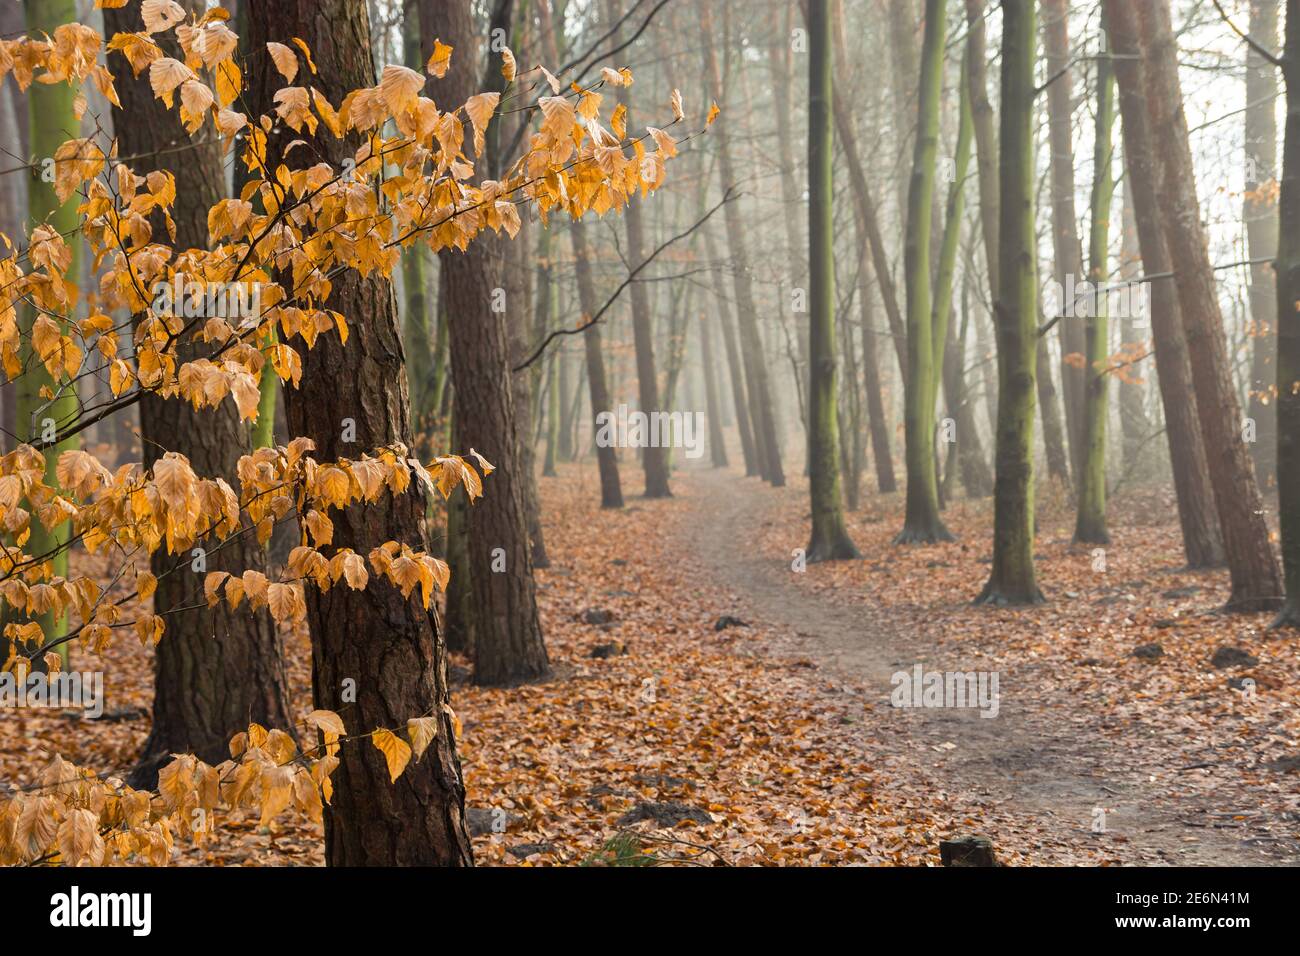 An alley in a misty forest and wet orange leaves Stock Photo